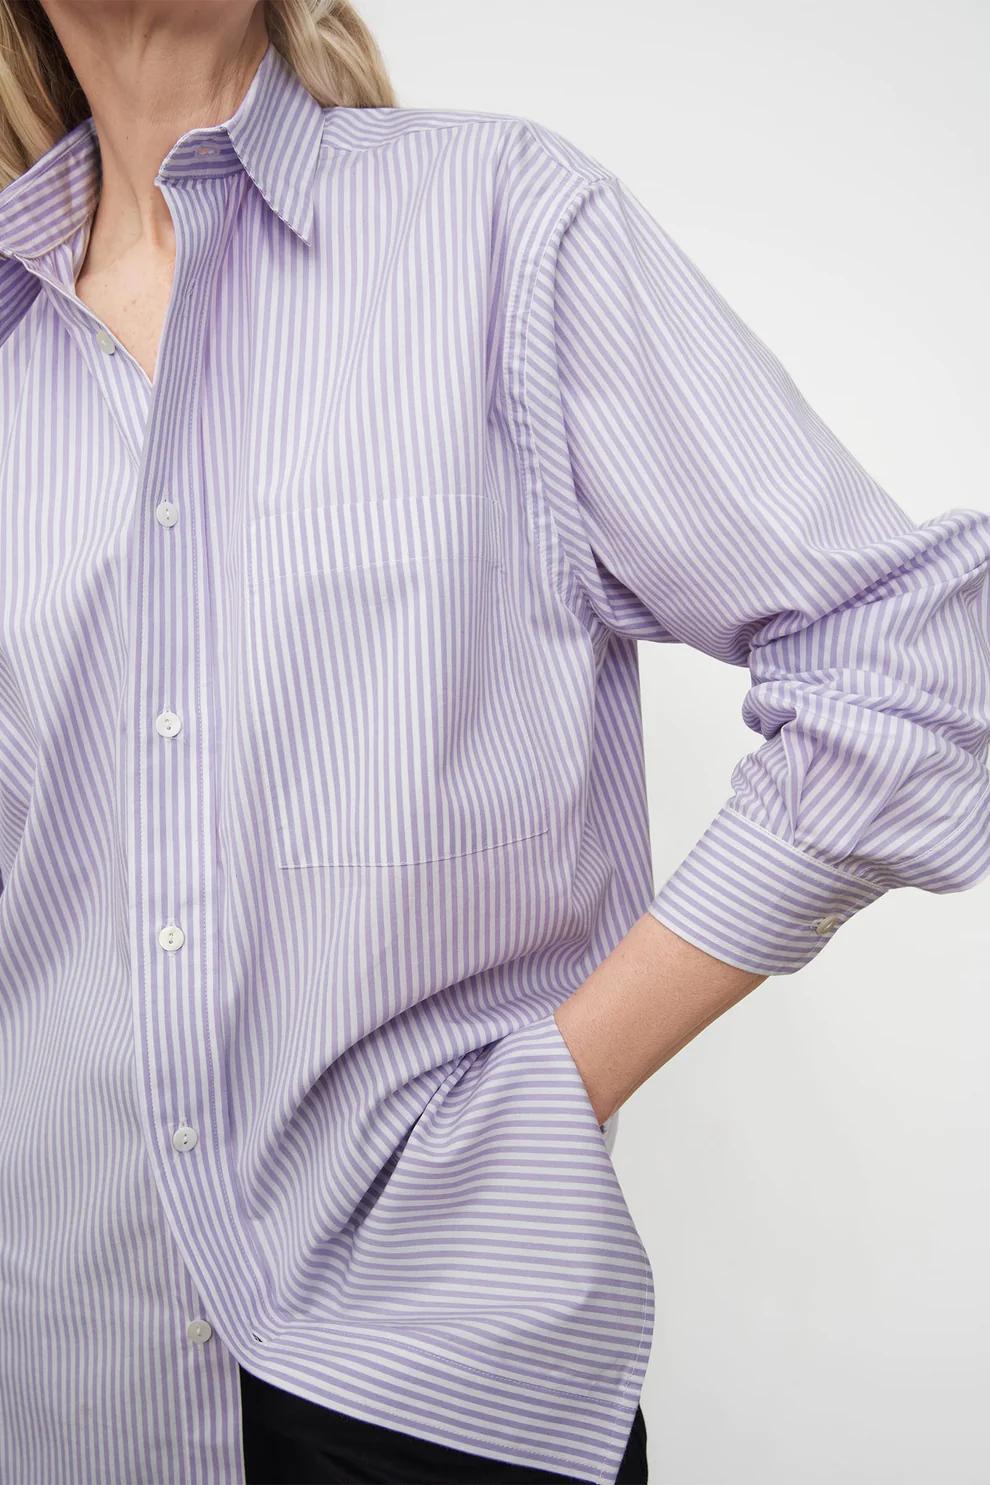 Product Image for James Shirt, Lilac Stripe